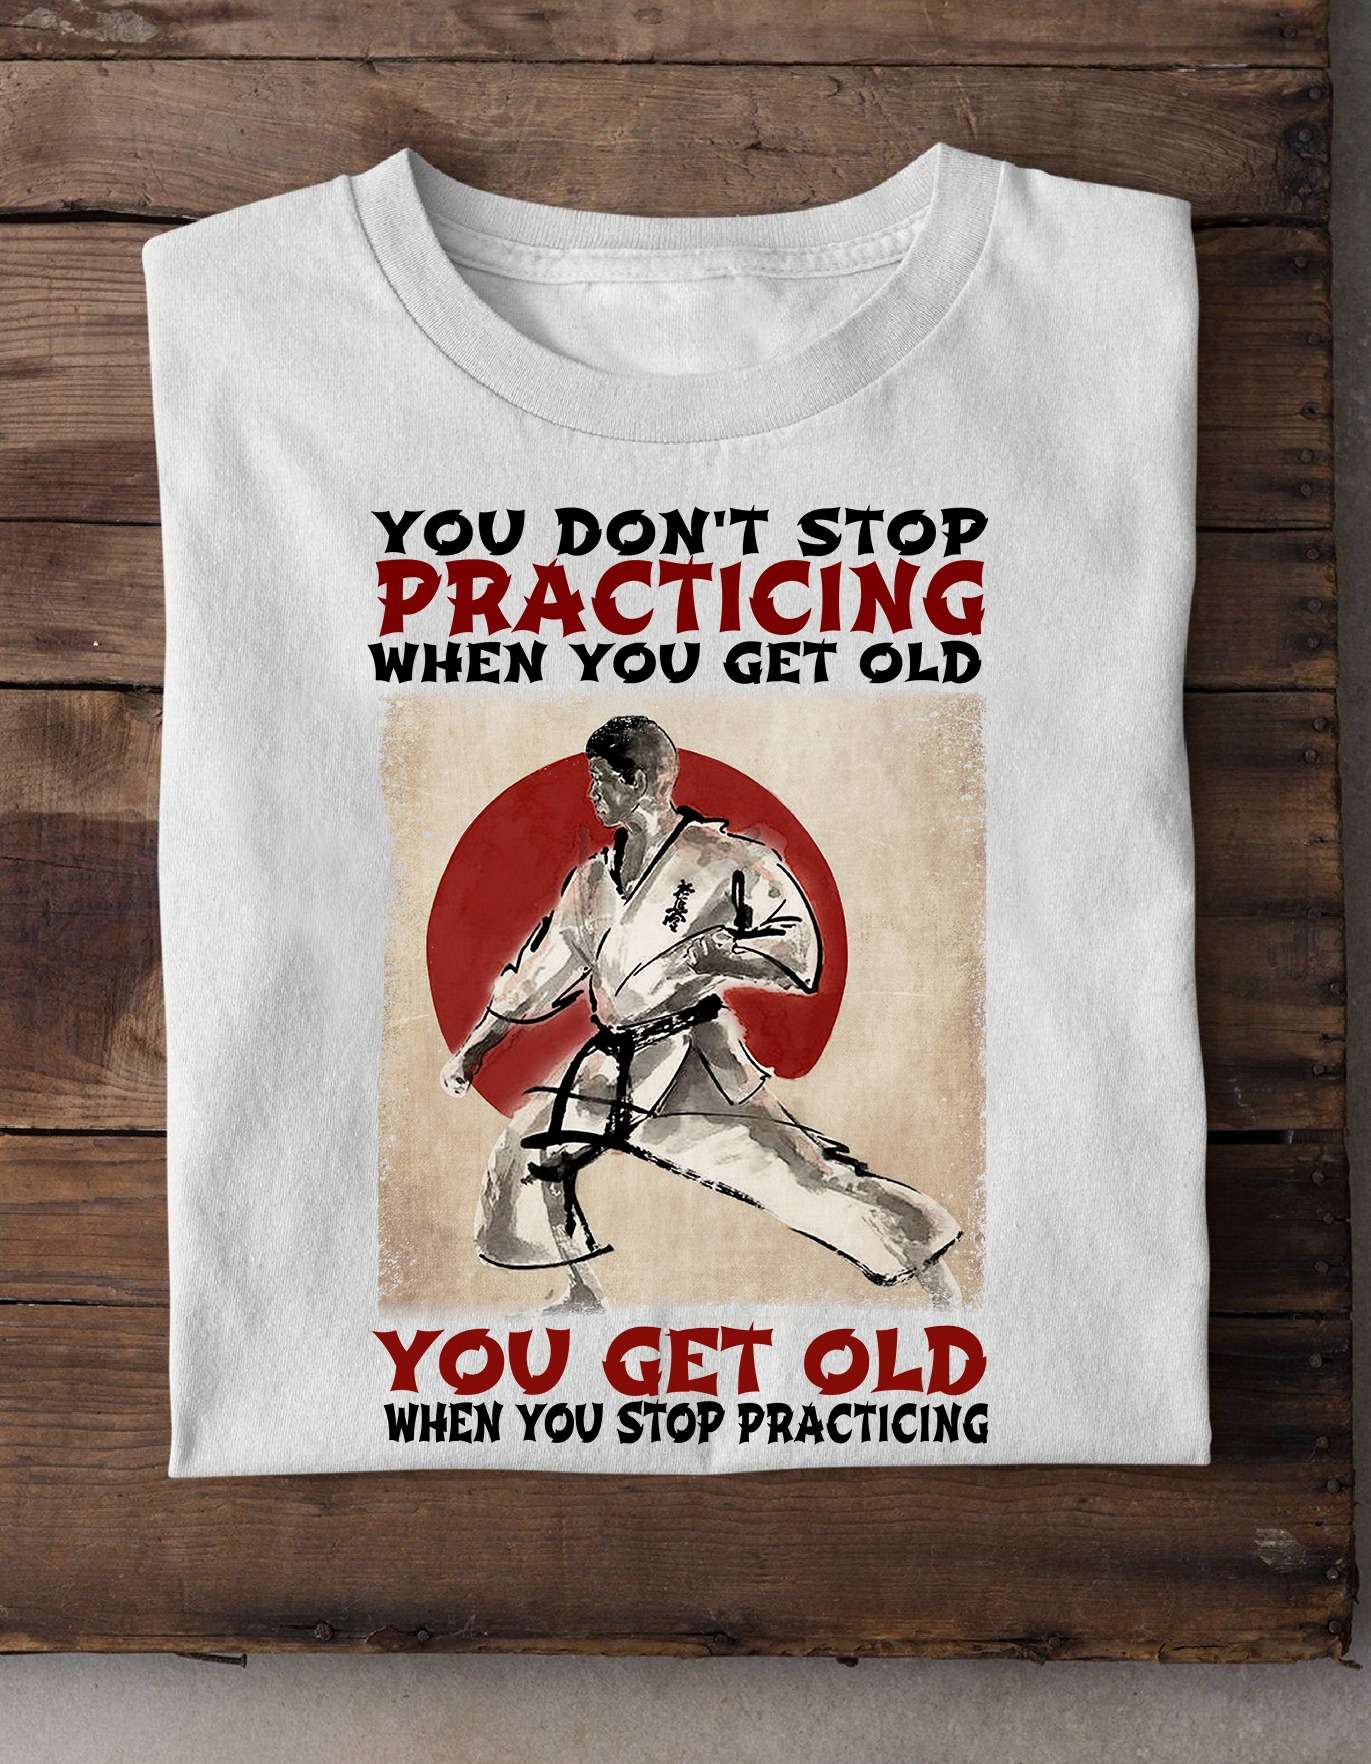 You don't stop practicing when you get old, you get old when you stop practicing - Judo practicing, Japanese judo kungfu